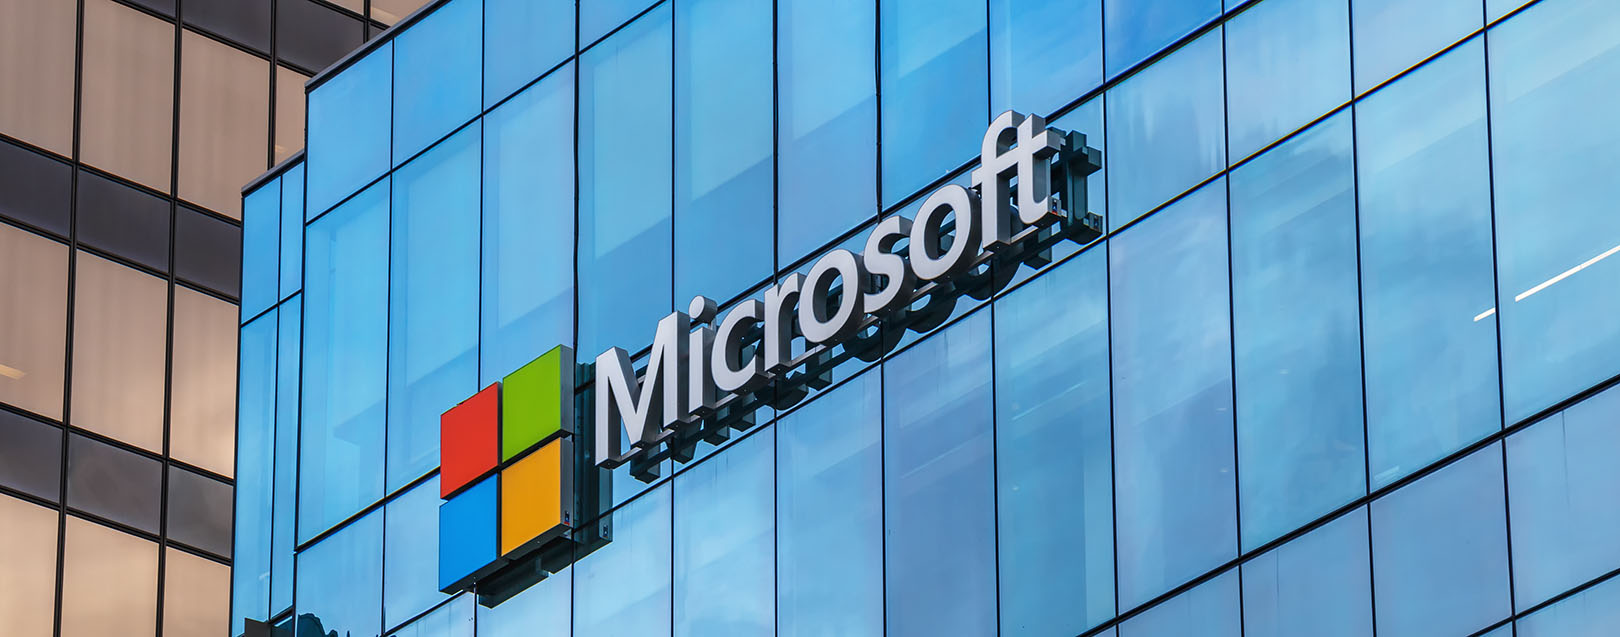 Microsoft posts growth in cloud services, drop in phones